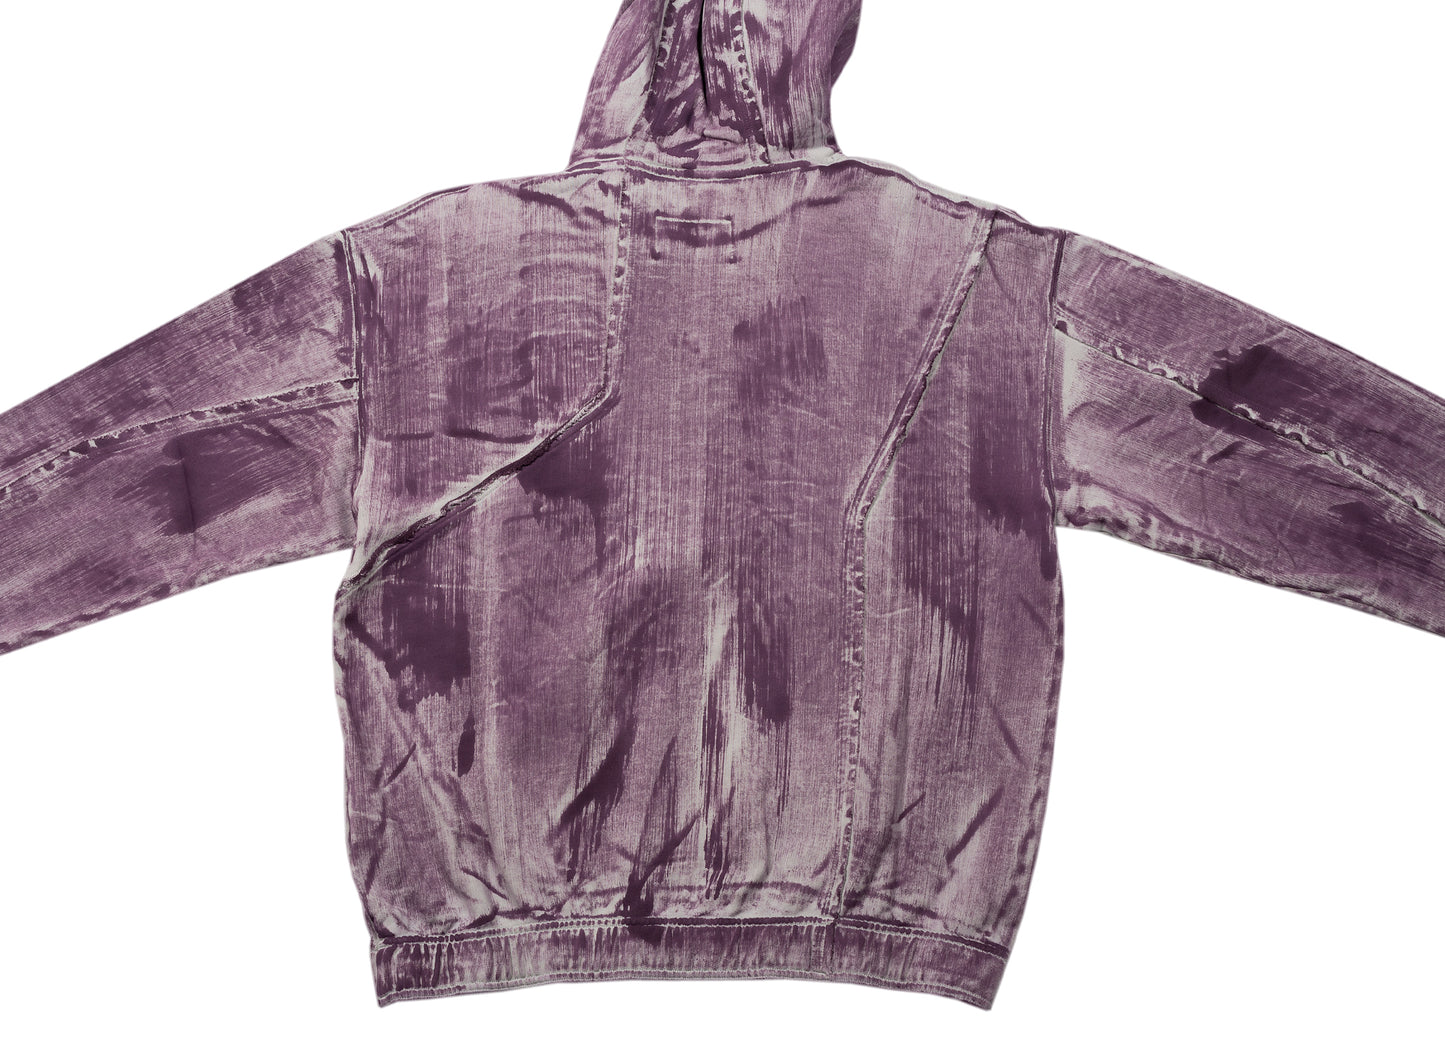 A-COLD-WALL* Corrosion Hooded Sweatshirt in Grey